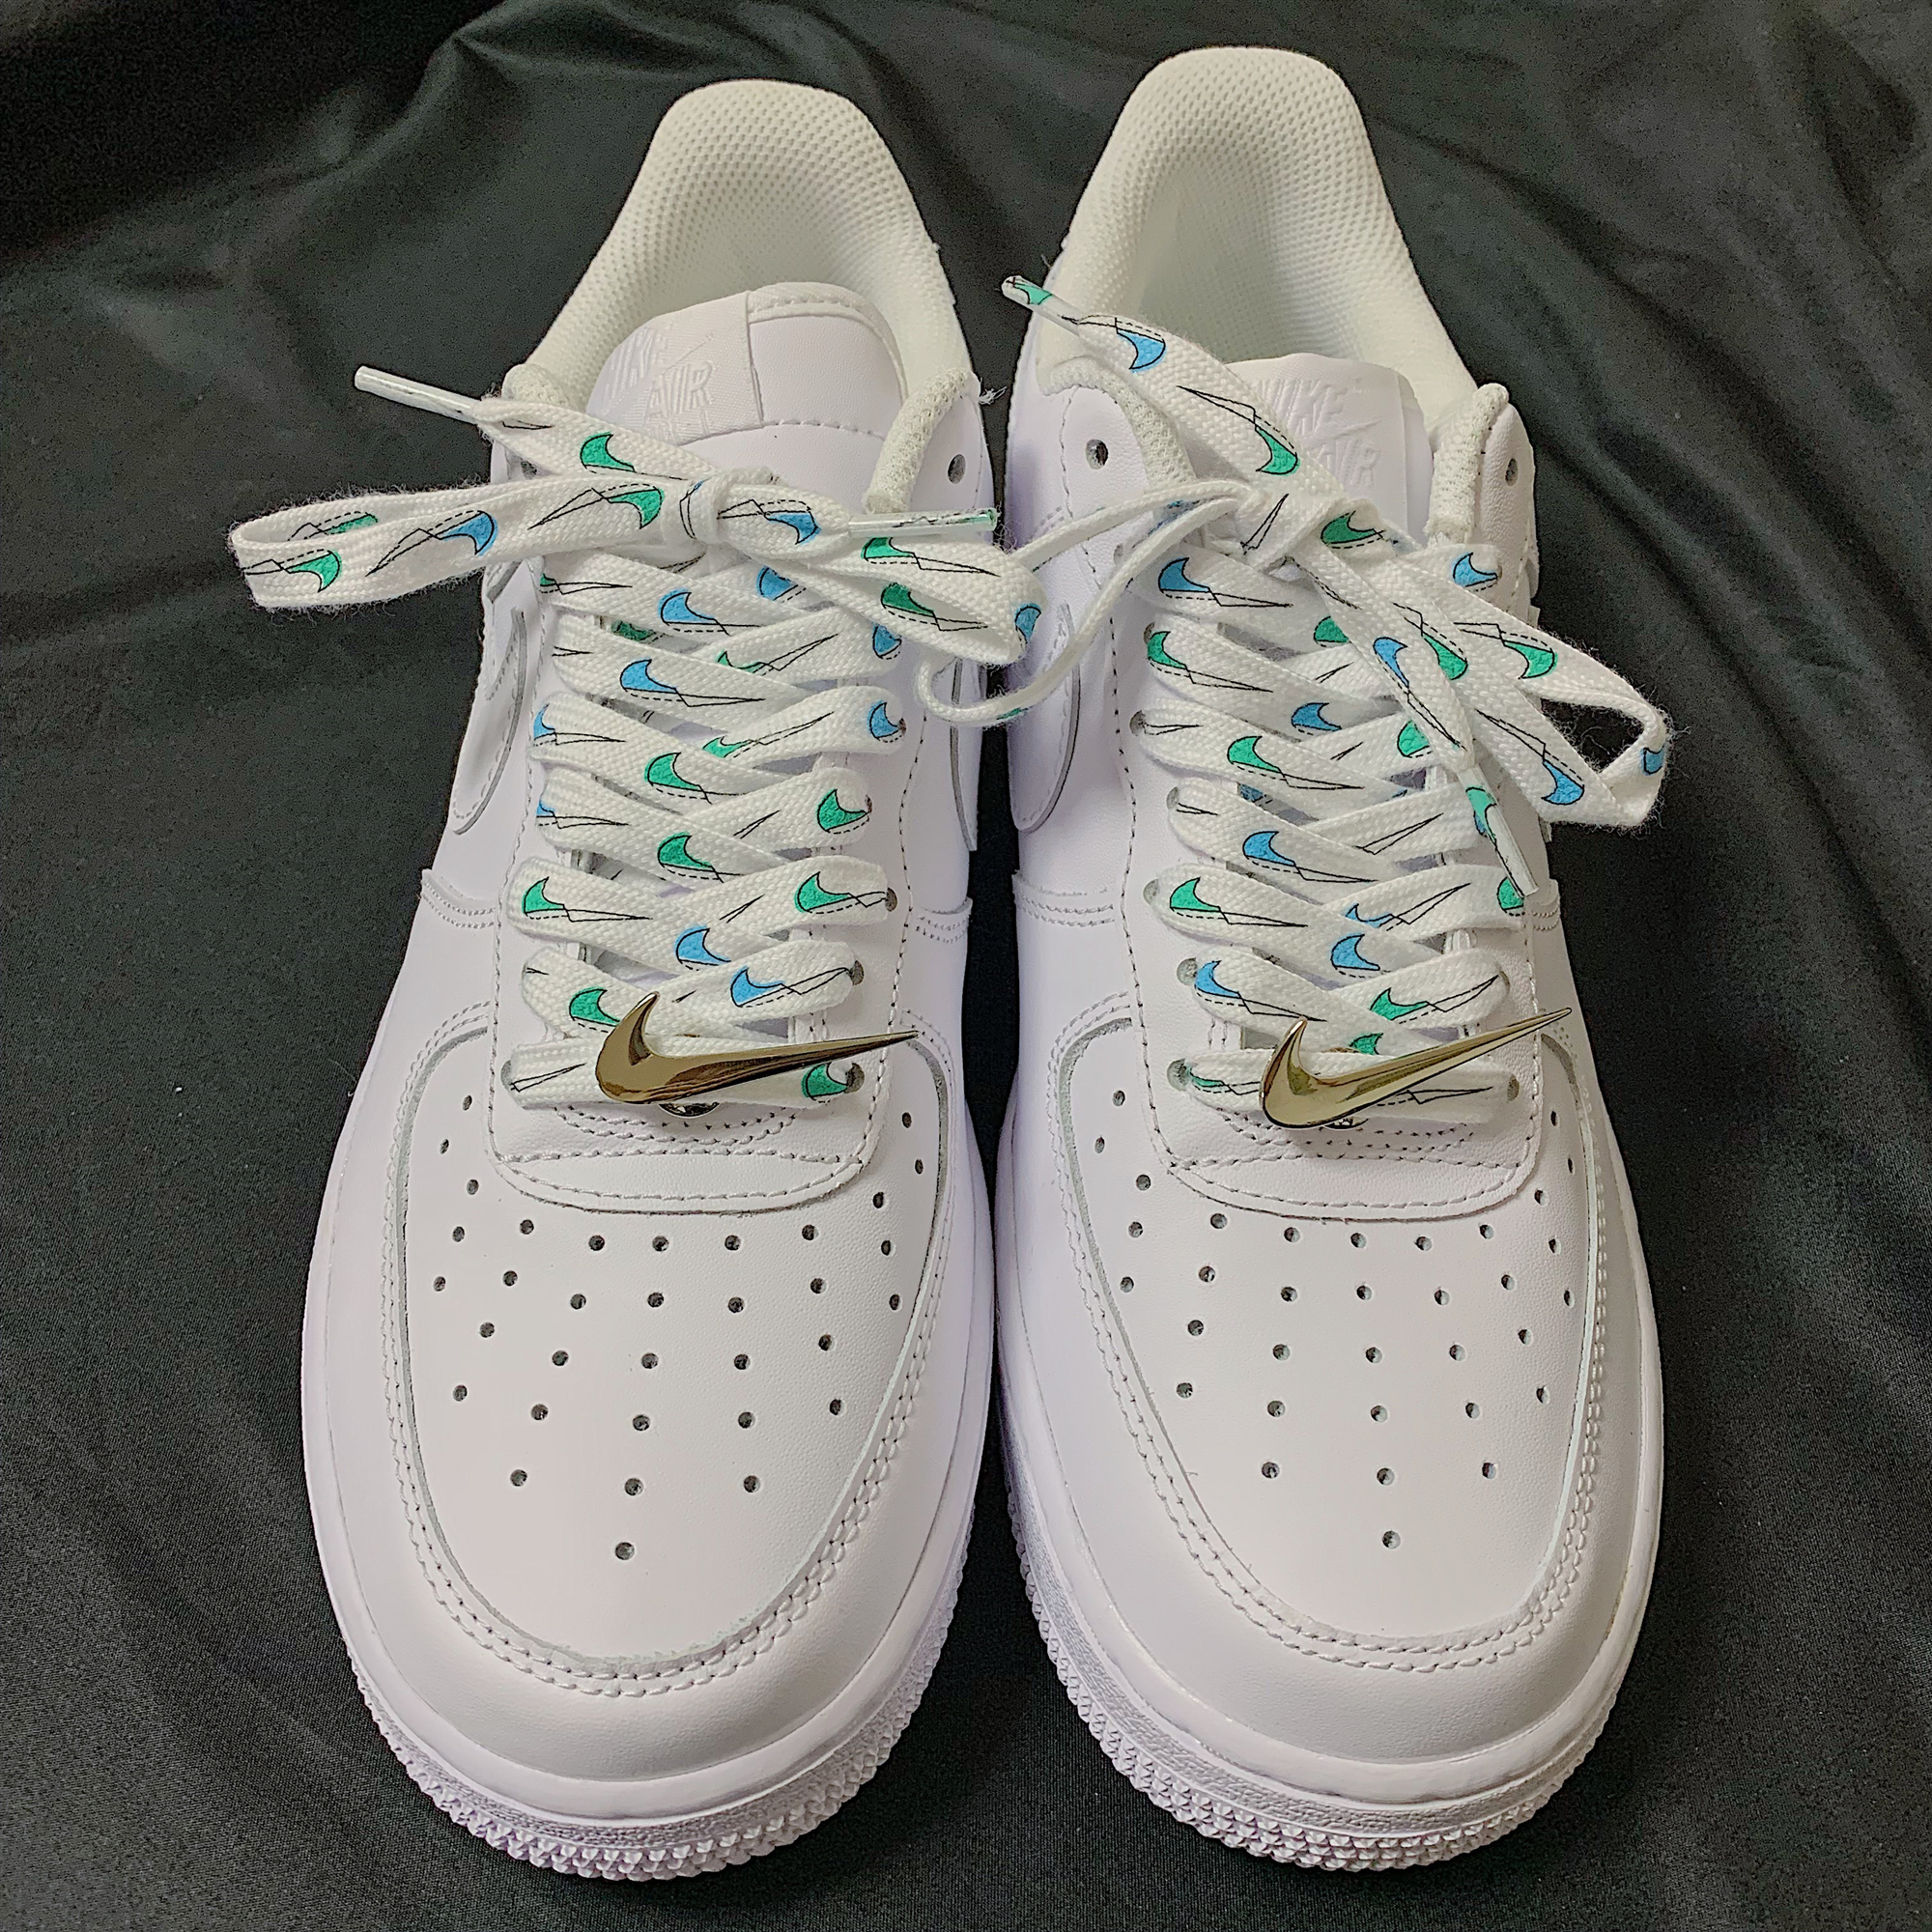 Printed SHOELACES For NIKE AJ AF1 /WHITE SHOES